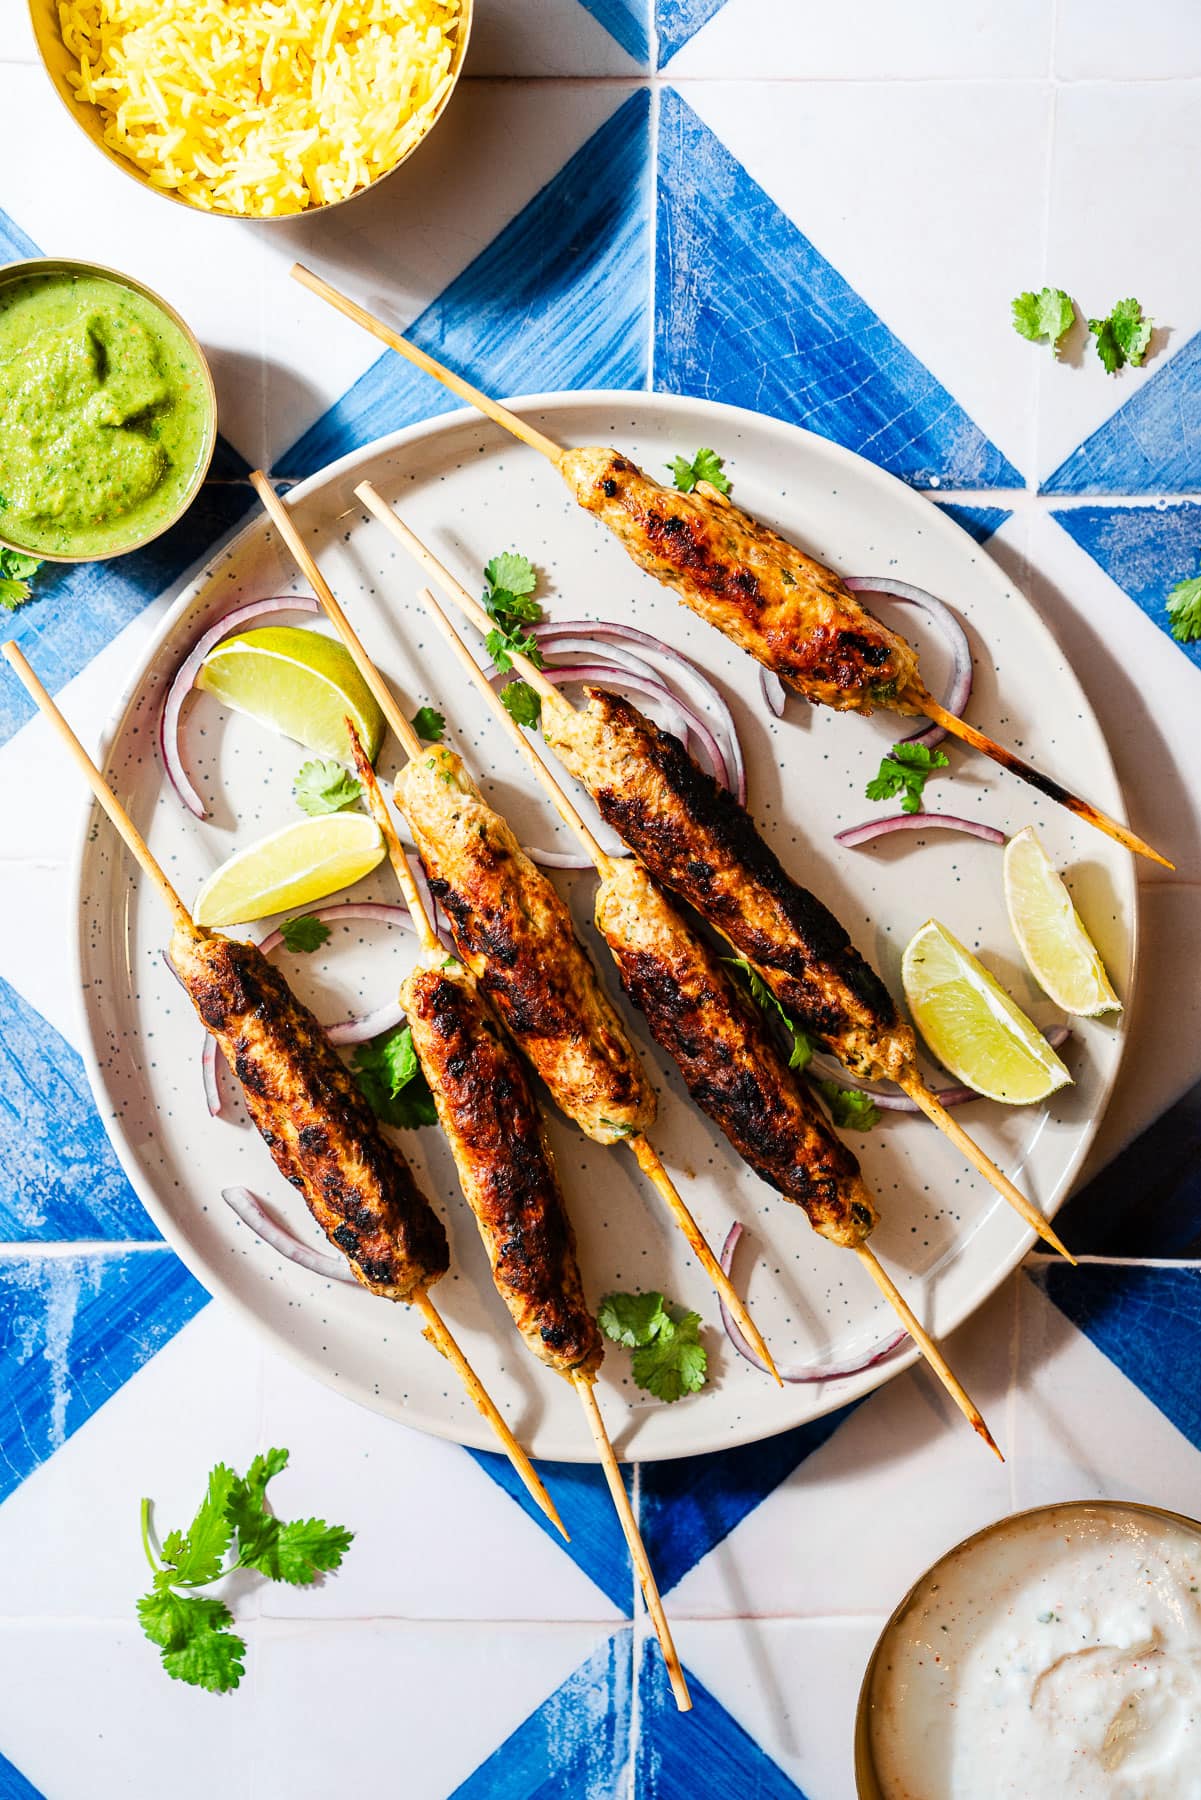 Chicken seekh kebabs on skewers in a plate with limes, onion, and cilantro with chutney, rice, and raita bowls.